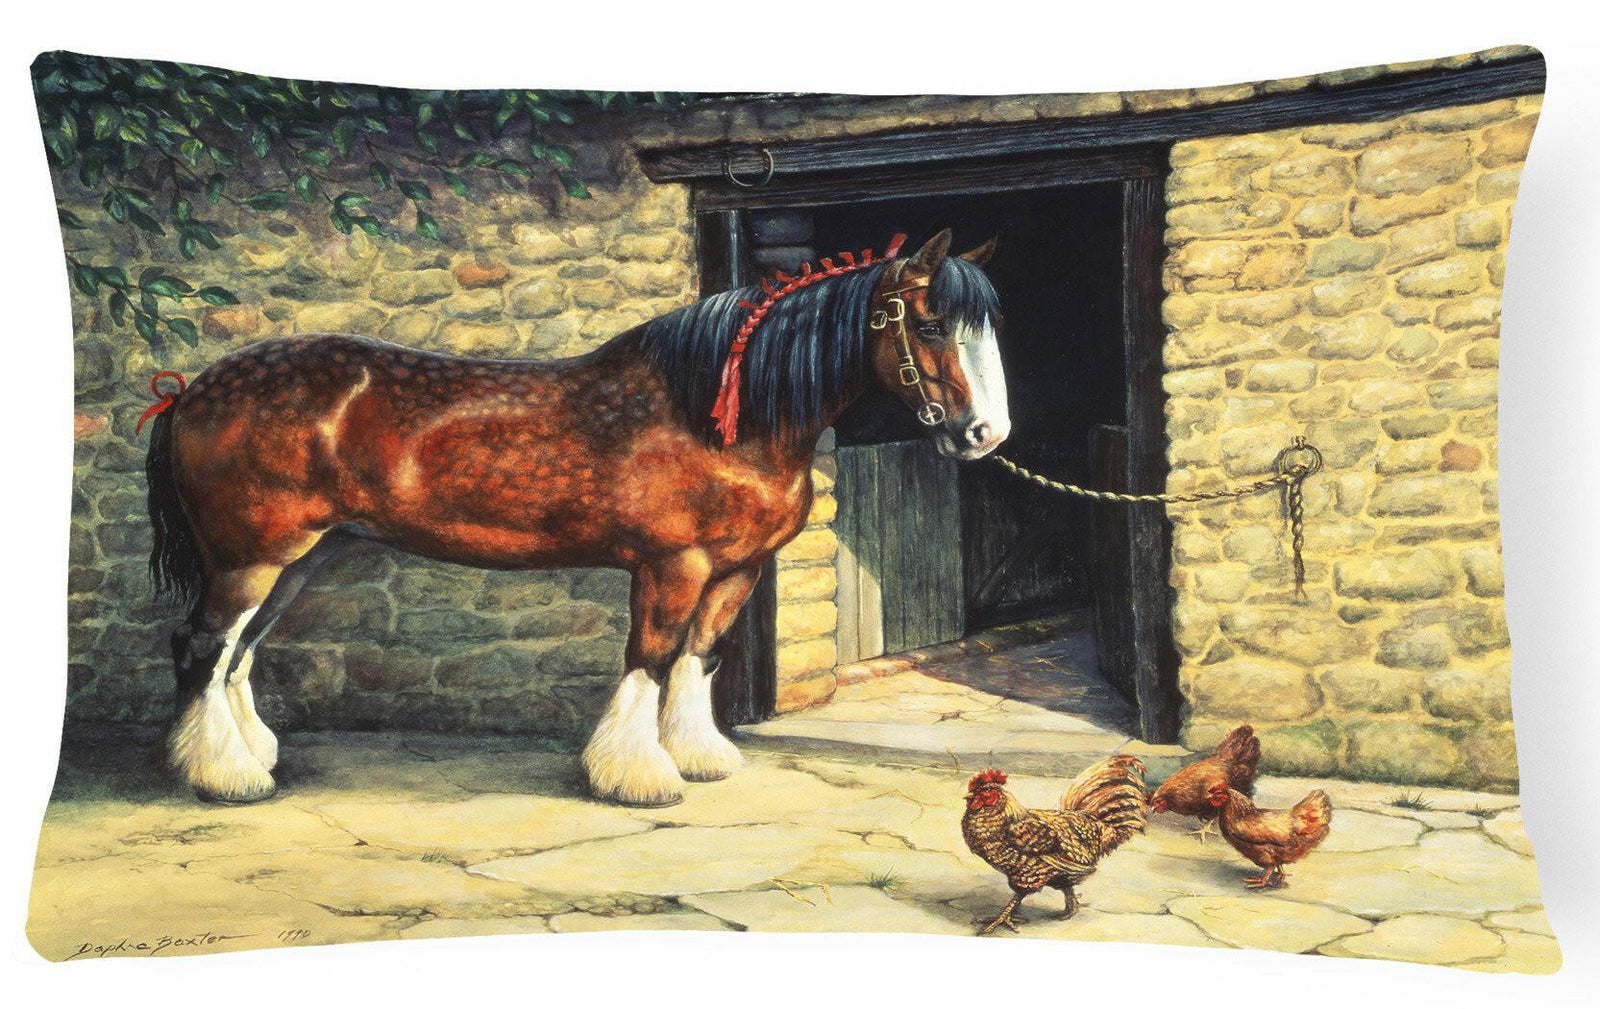 Horse and Chickens by Daphne Baxter Fabric Decorative Pillow BDBA0087PW1216 by Caroline's Treasures